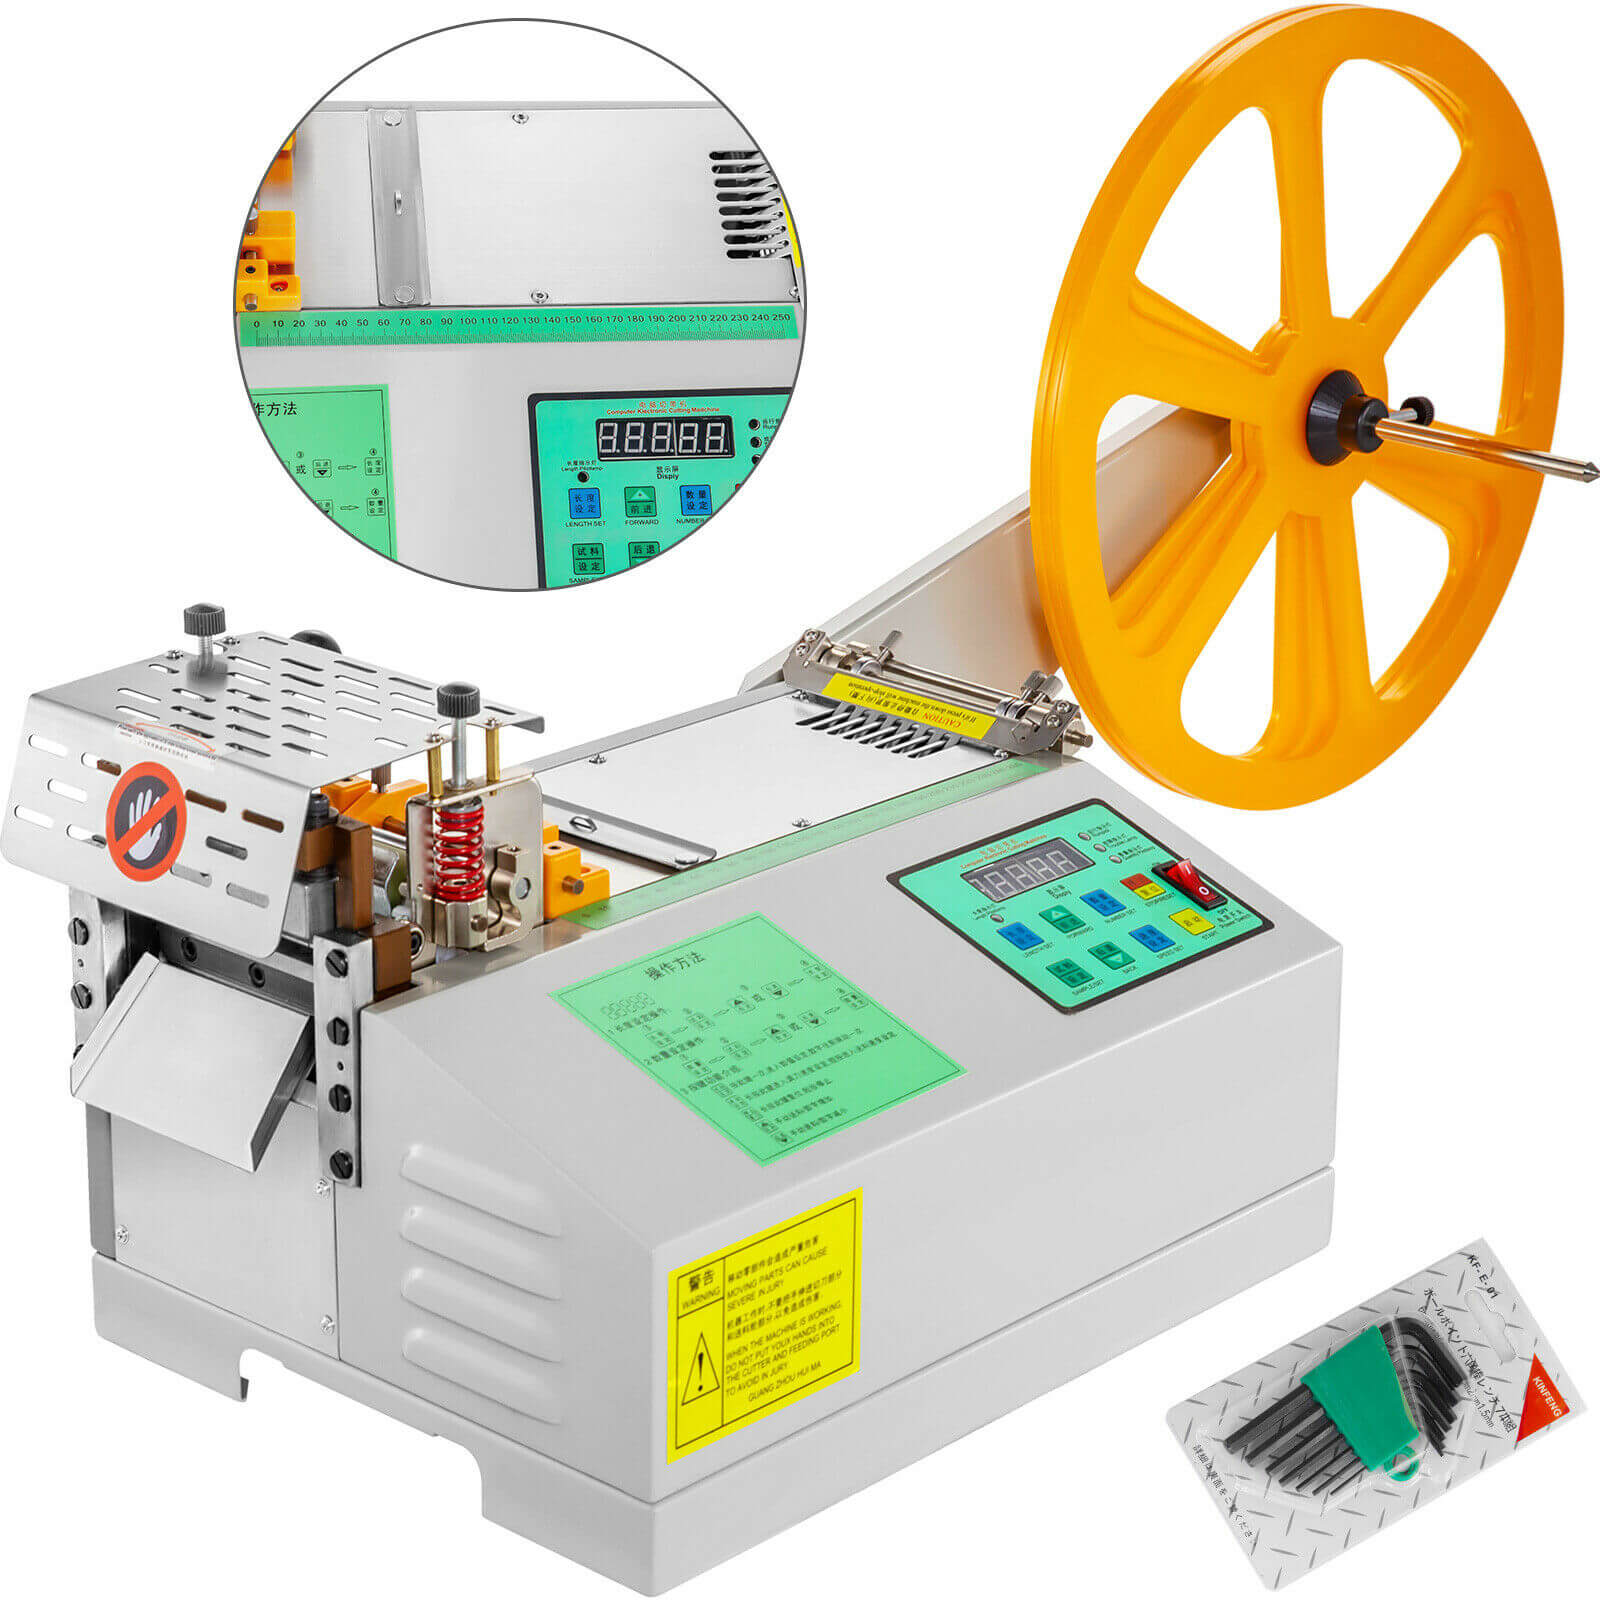 VEVOR Automatic Hot and Cold Tape Cutting Machine 440W 350°C